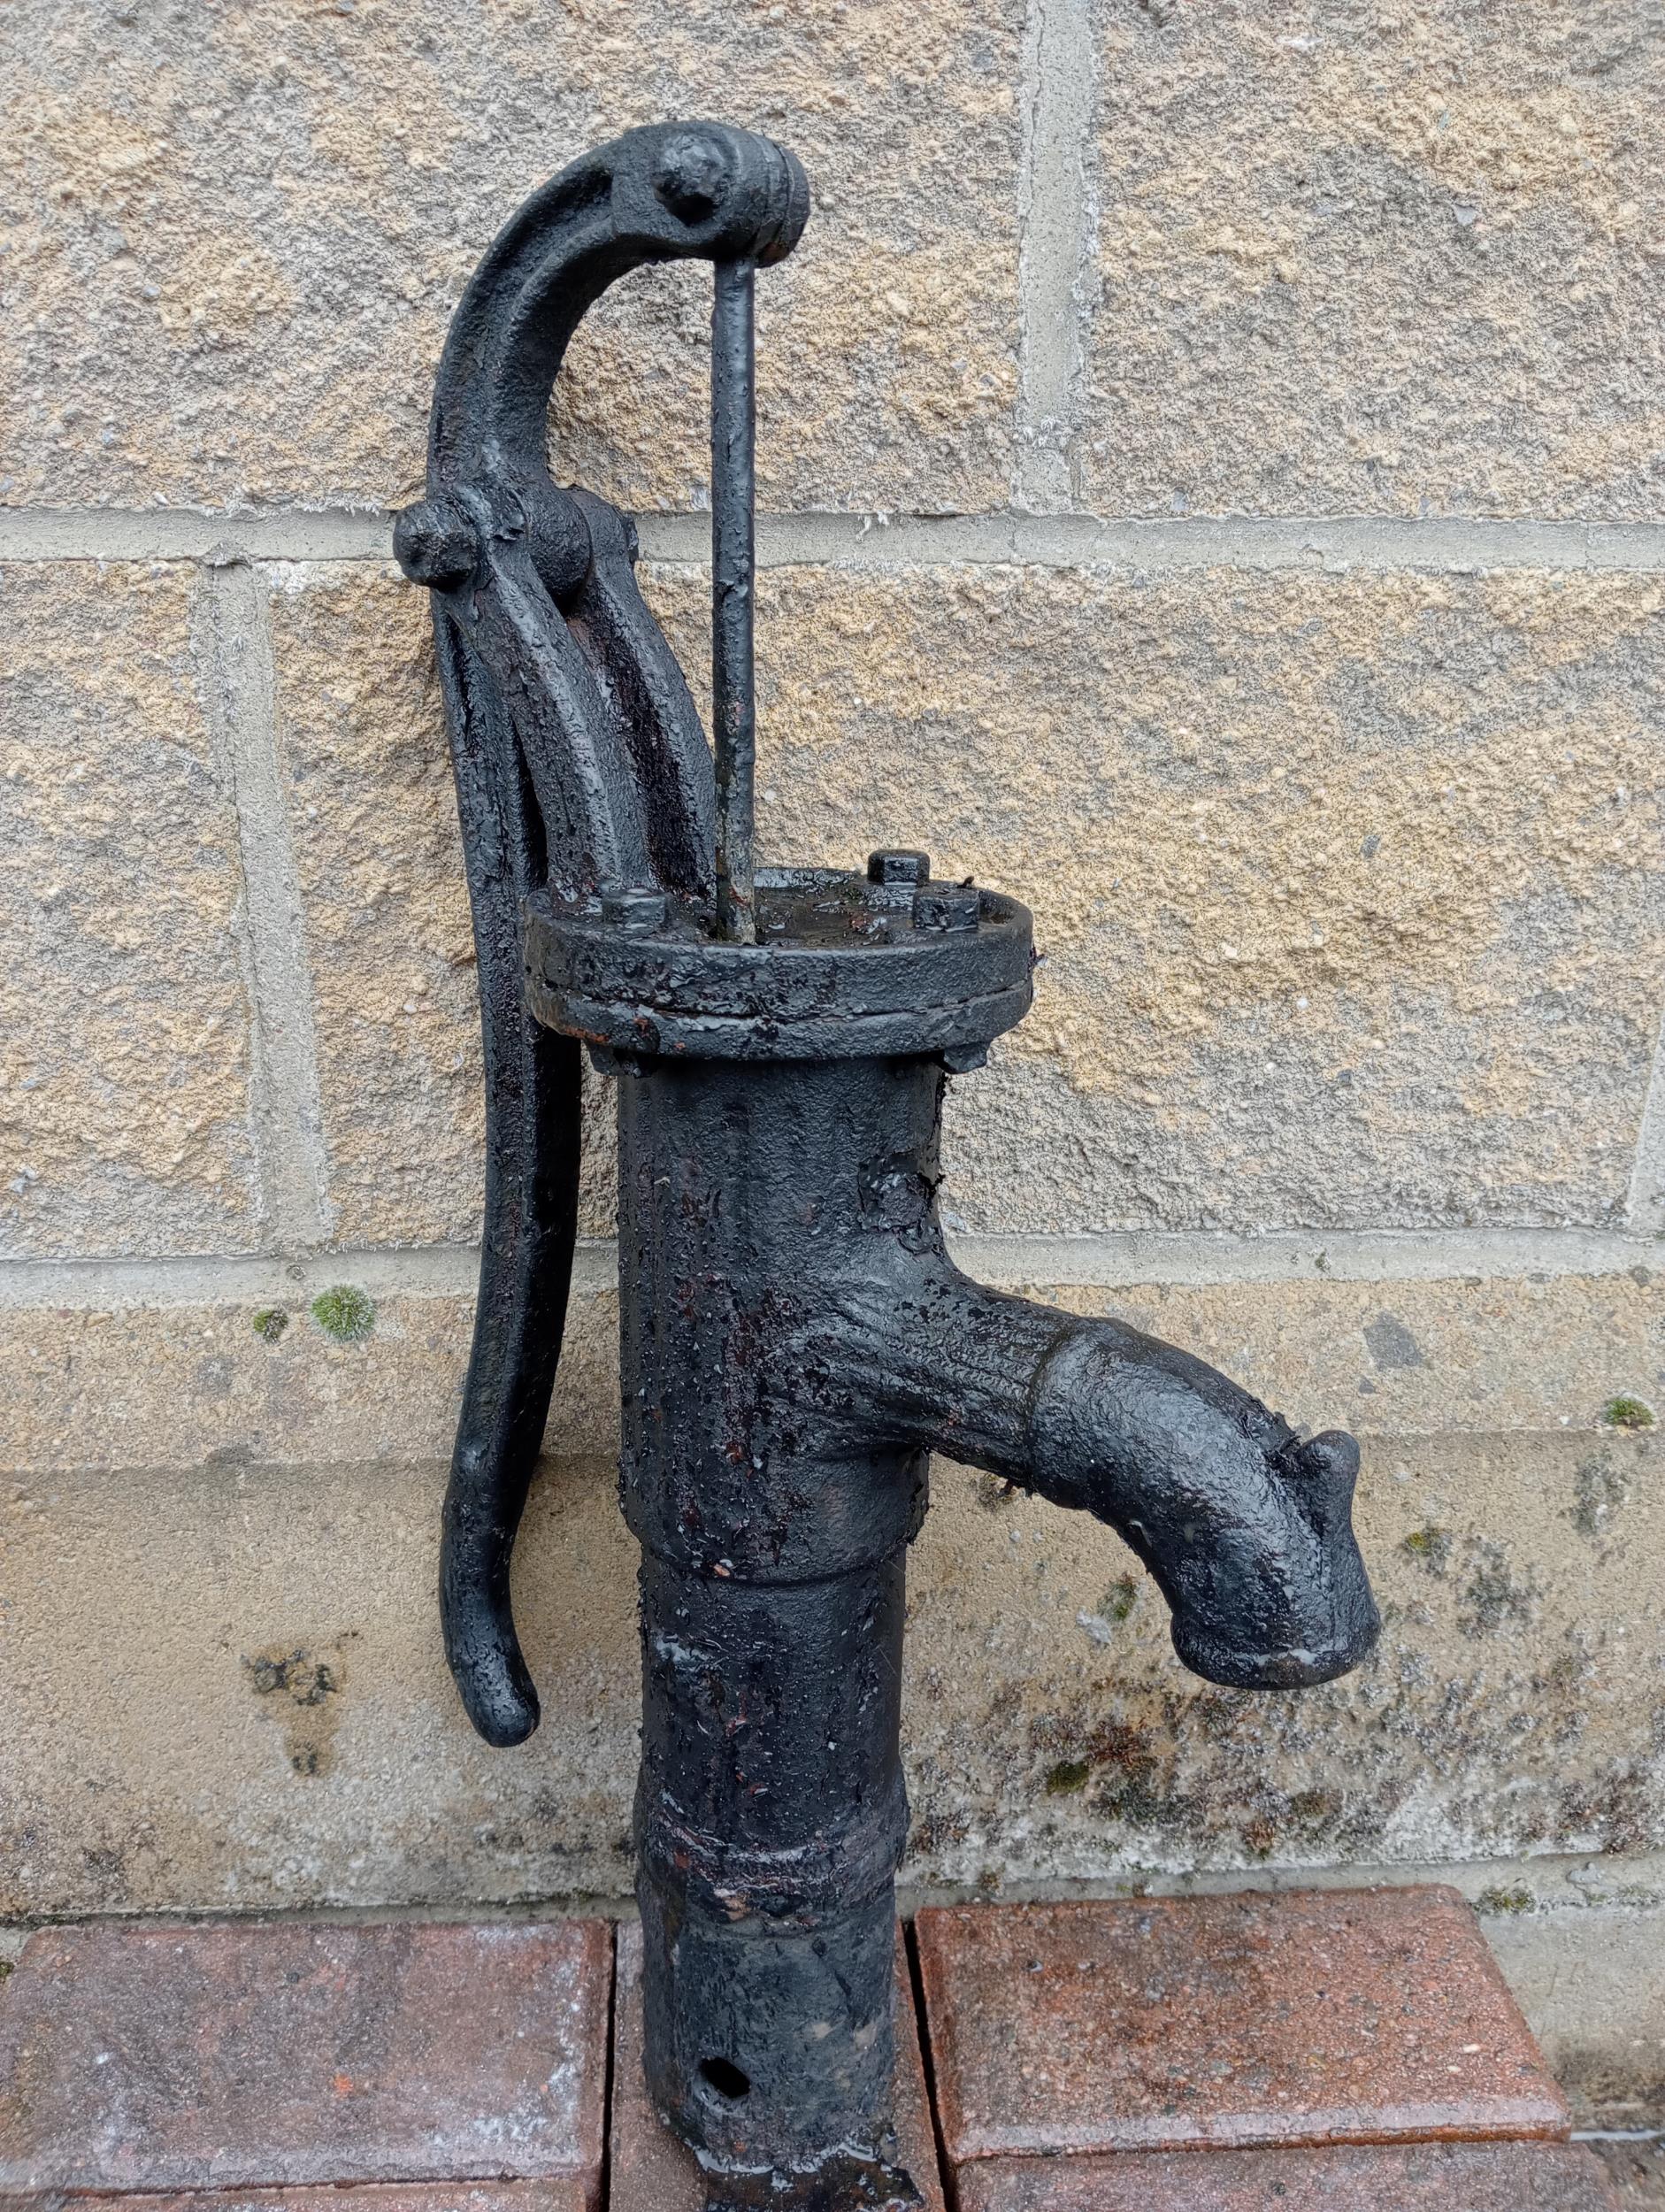 Cast iron water pump {H 60cm x W 30cm x D 15cm }. (NOT AVAILABLE TO VIEW IN PERSON)